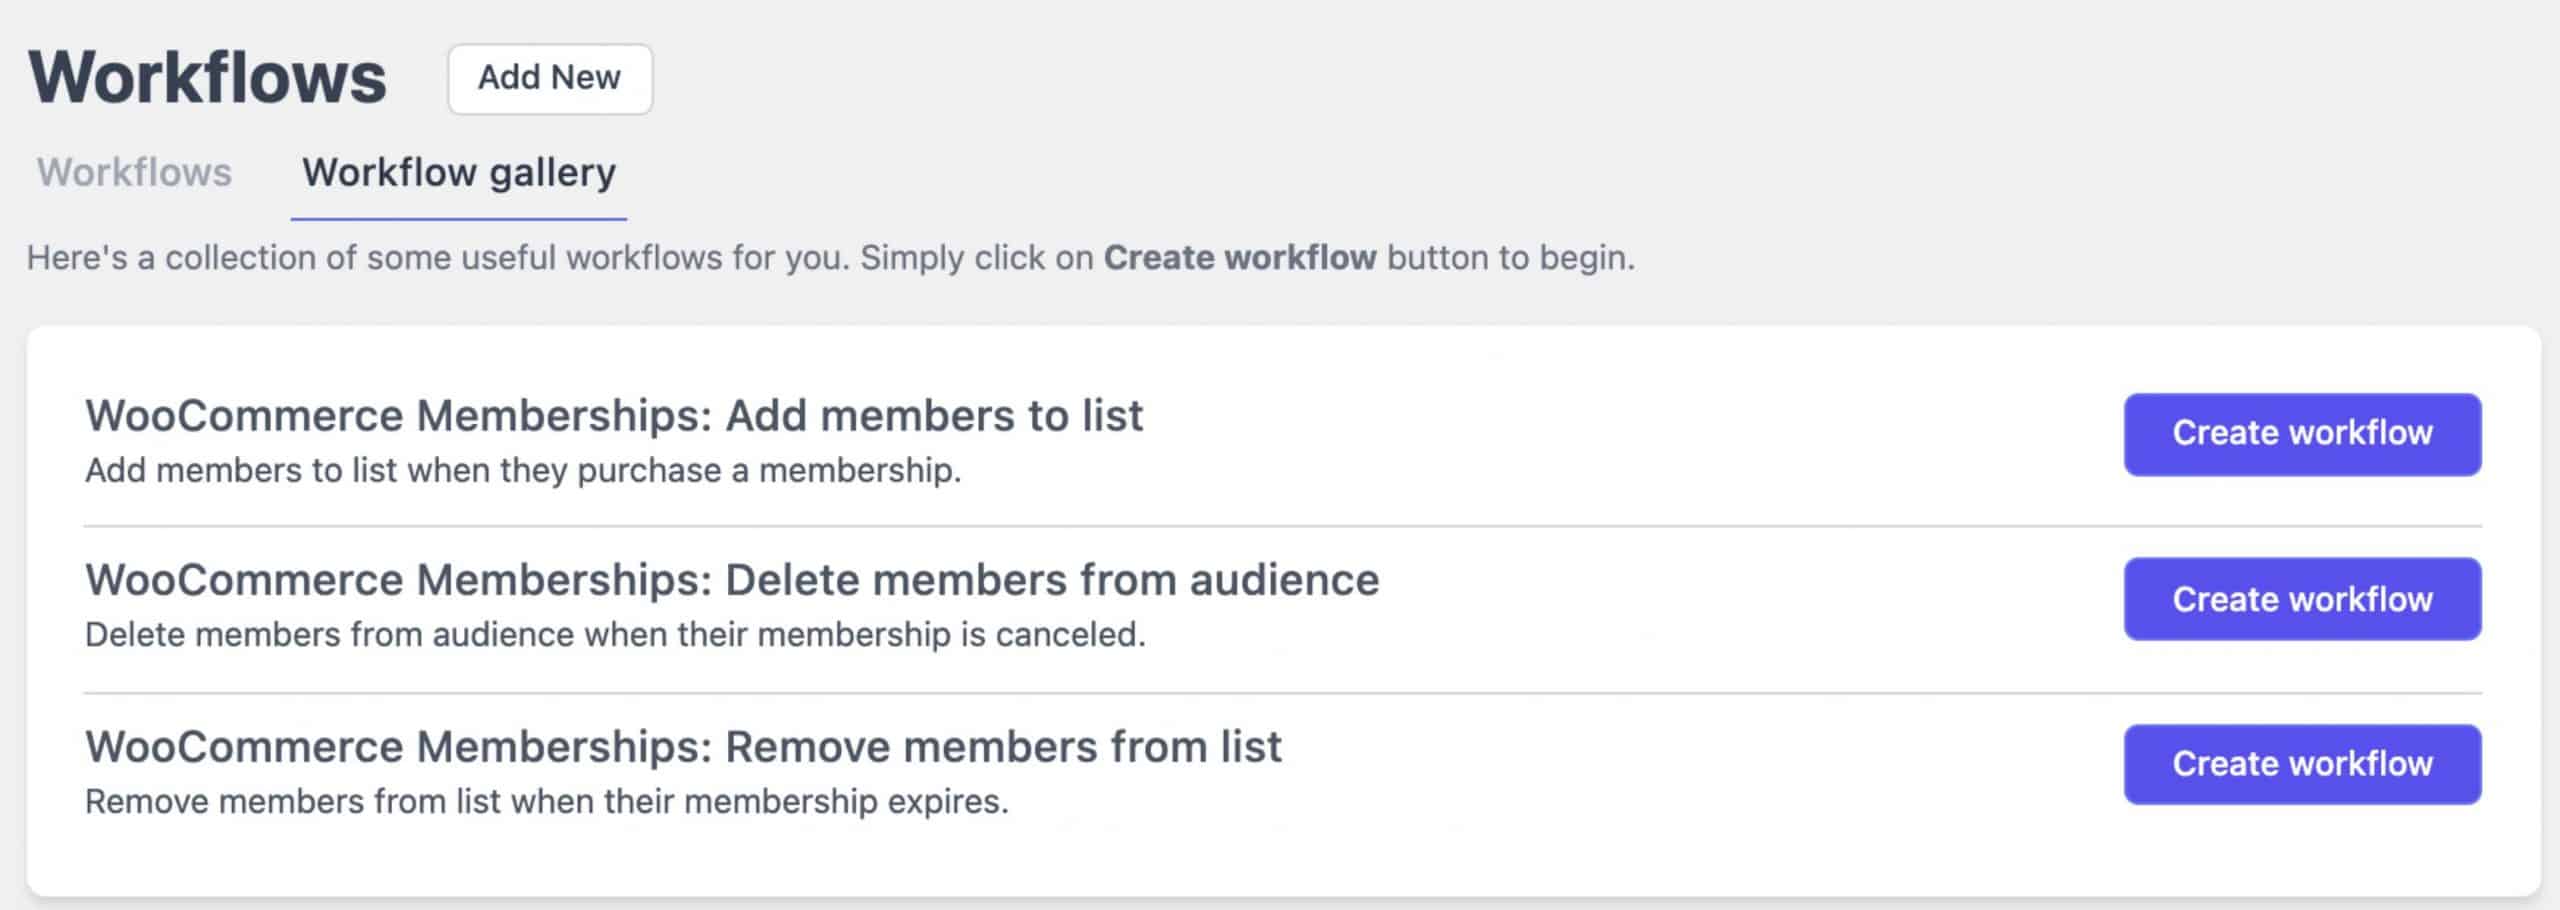 Email Subscribers and WooCommerce Memberships Workflows